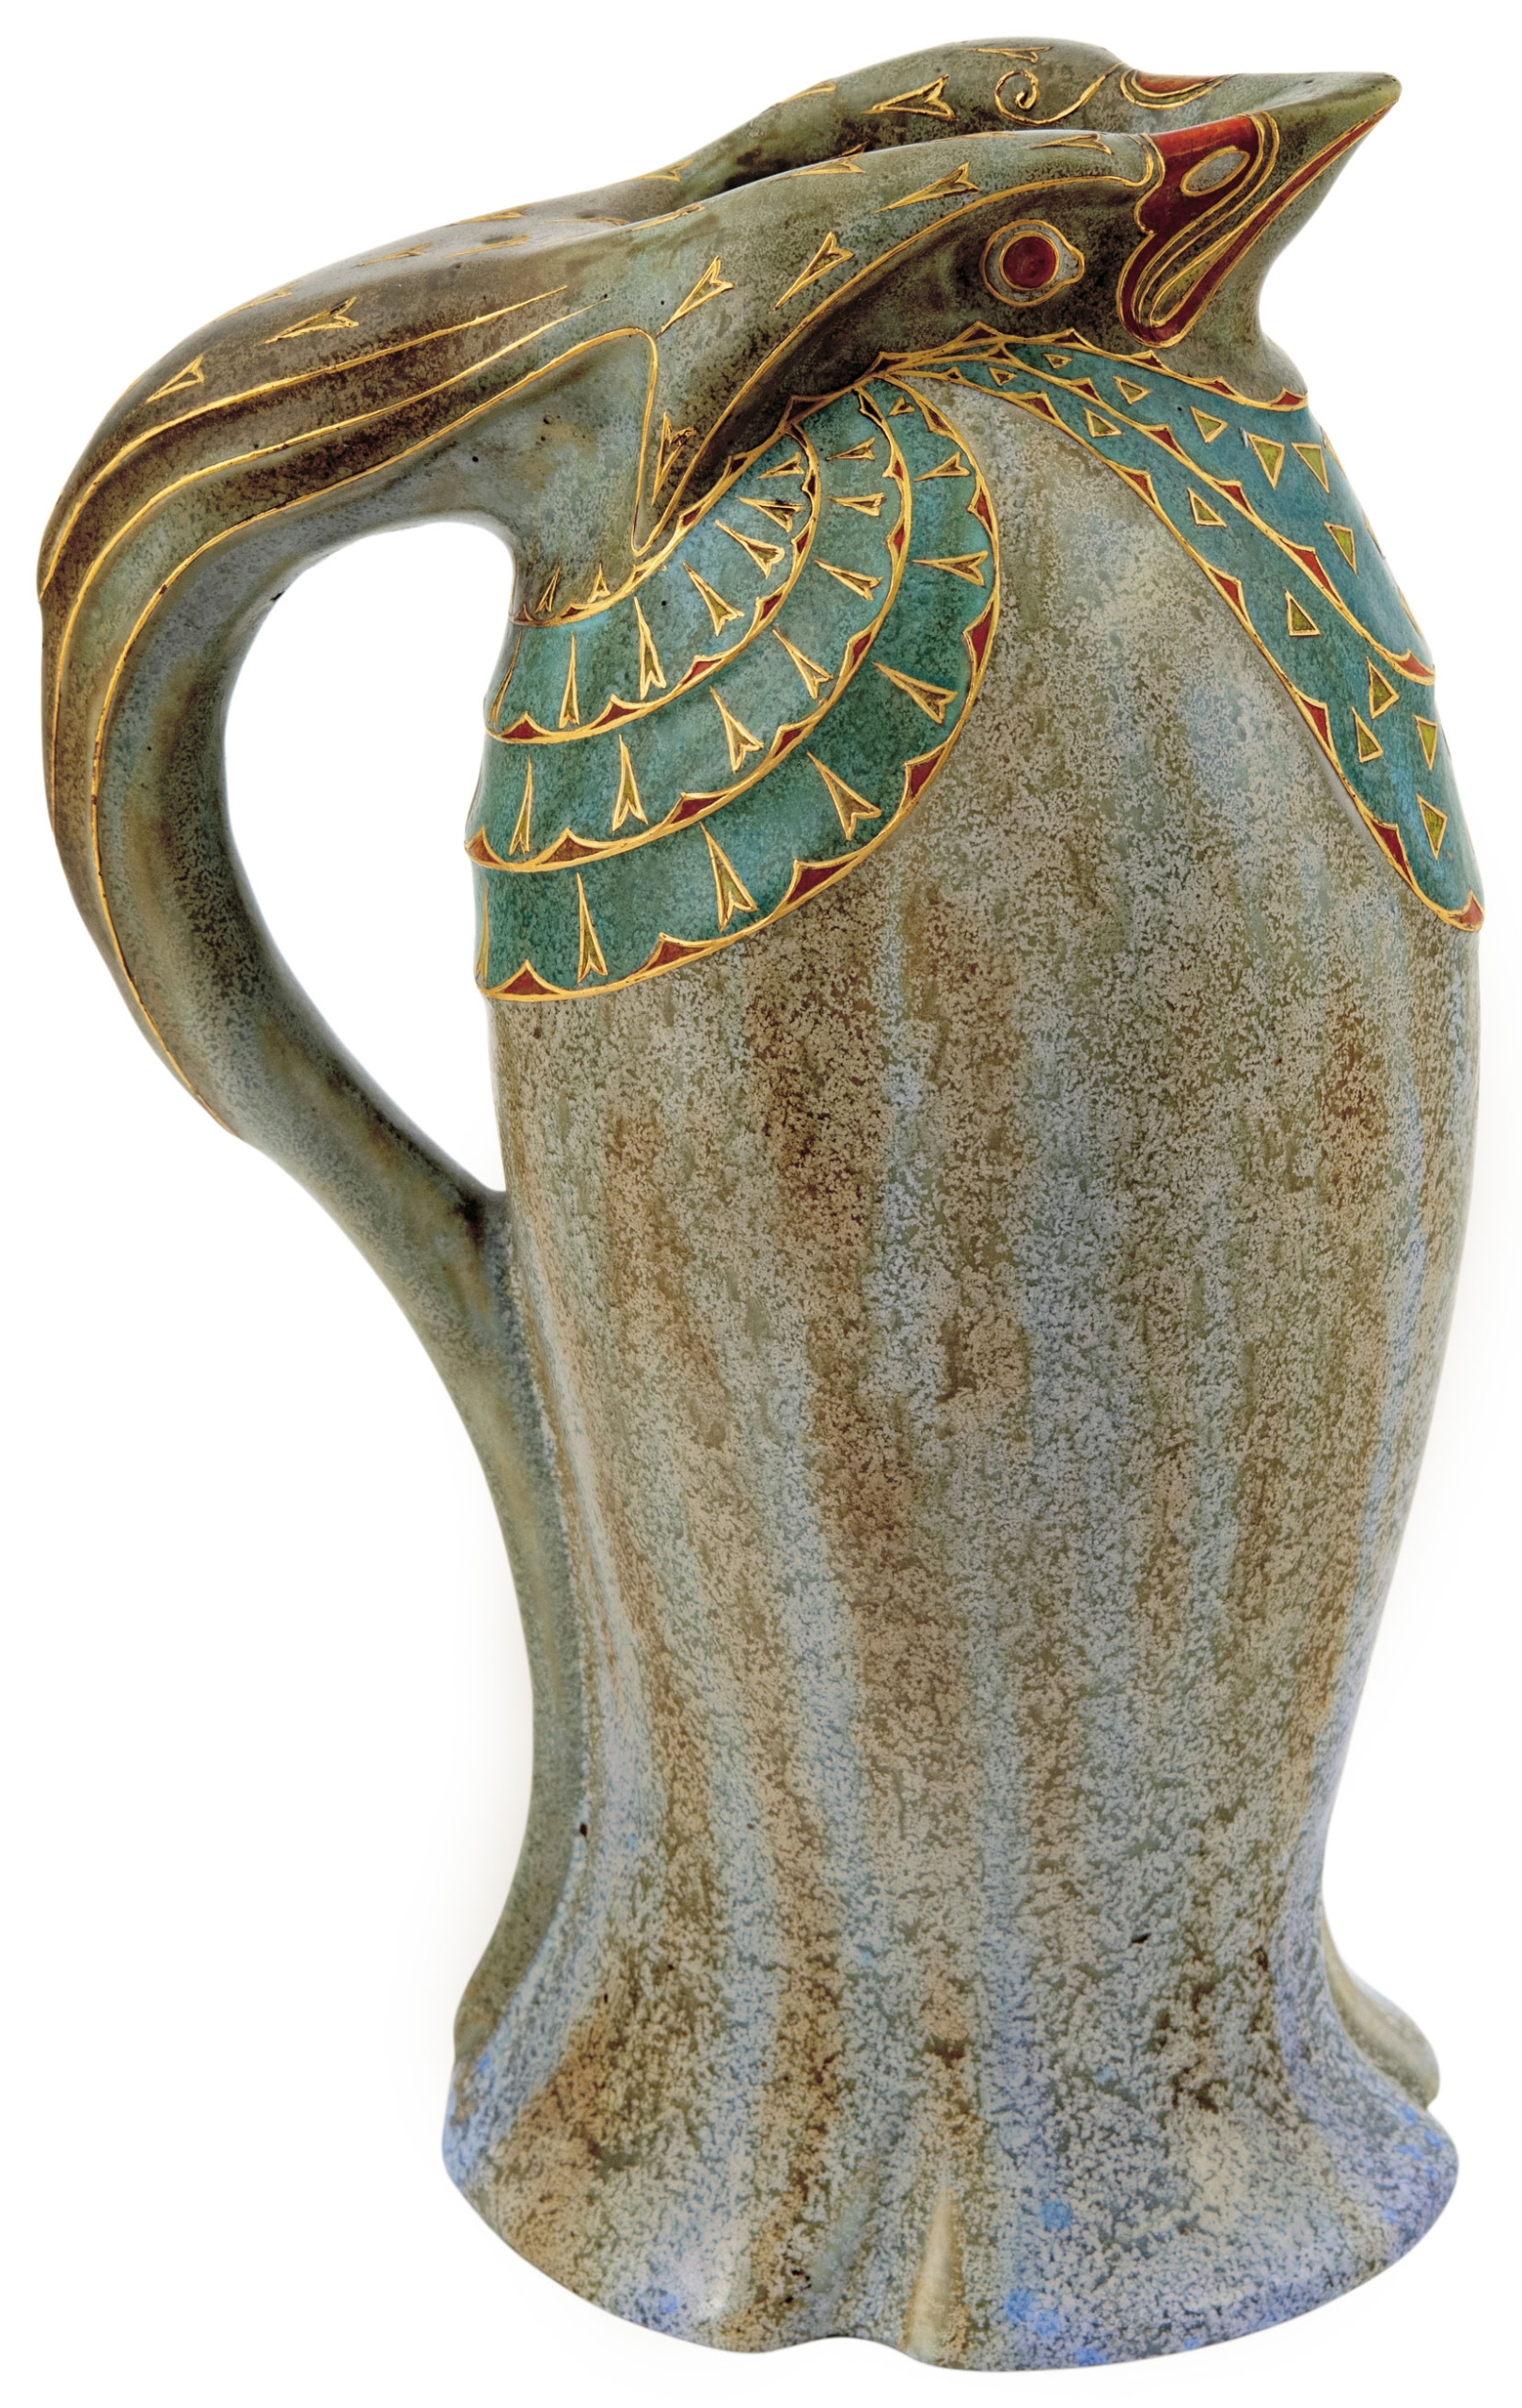 Zsolnay Falcon Jug from the Grès series, 1907, DESIGN BY: APÁTI ABT SÁNDOR, CAST AND DECOR BY: MACK LAJOS